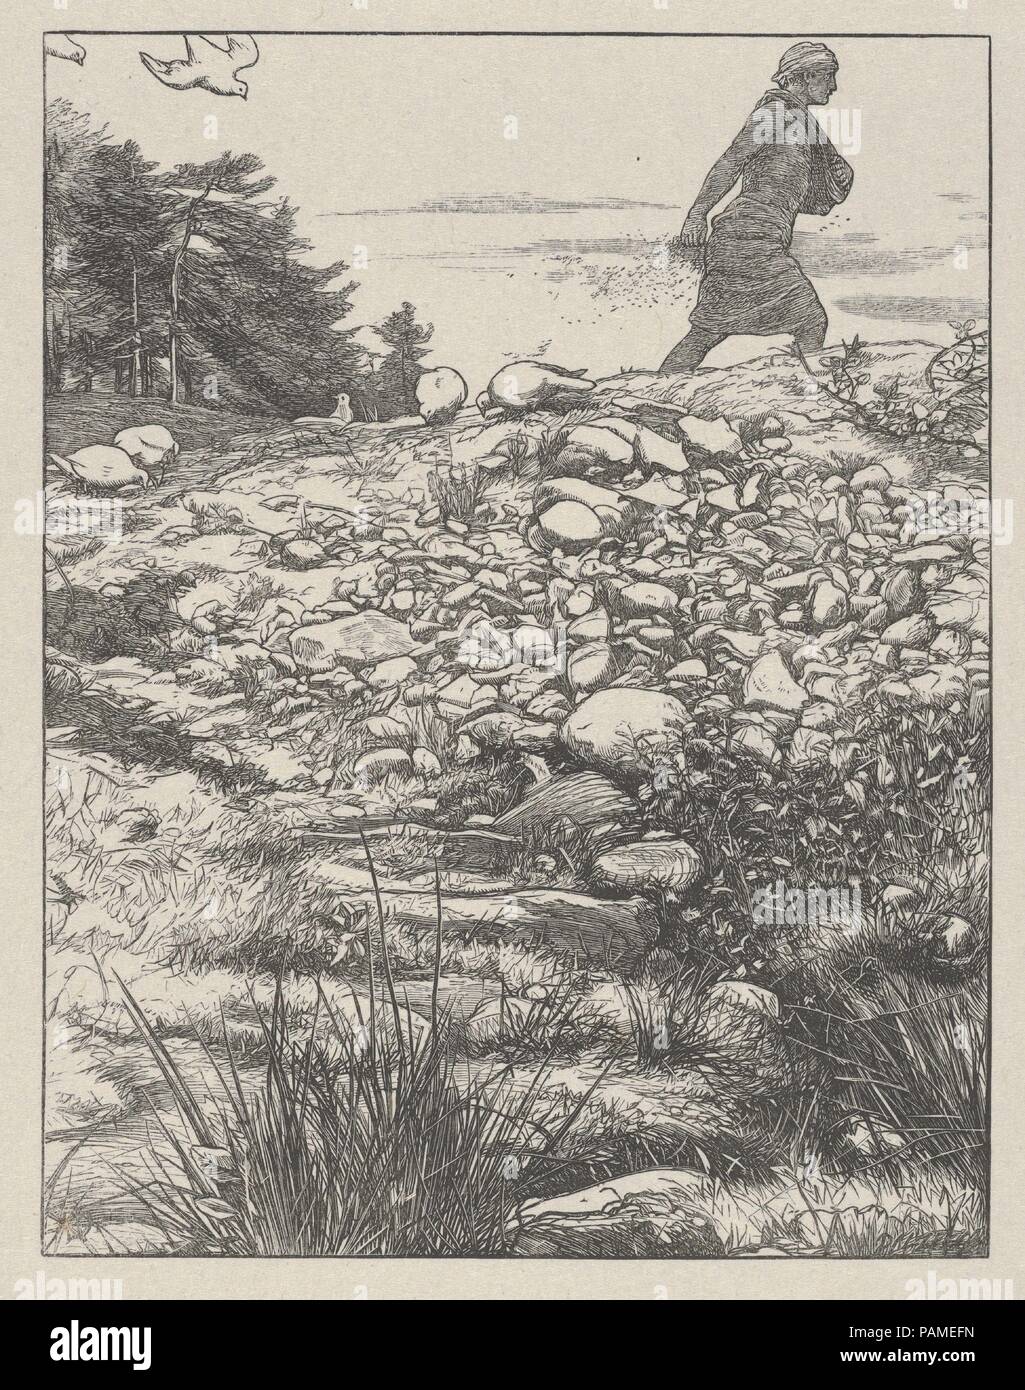 The Sower (The Parables of Our Lord and Saviour Jesus Christ). Artist: After Sir John Everett Millais (British, Southampton 1829-1896 London). Dimensions: image: 5 1/2 x 4 5/16 in. (13.9 x 10.9 cm)  sheet: 7 5/16 x 6 1/16 in. (18.6 x 15.4 cm). Engraver: Dalziel Brothers (British, active 1839-1893). Date: 1864.  It took Millais seven years to design twenty images inspired by New Testament Parables for the Dalziel Brothers, and the resulting prints are considered pinnacles of wood engraved illustration. The artist wrote to his publishers, 'I can do ordinary drawings as quickly as most men, but t Stock Photo